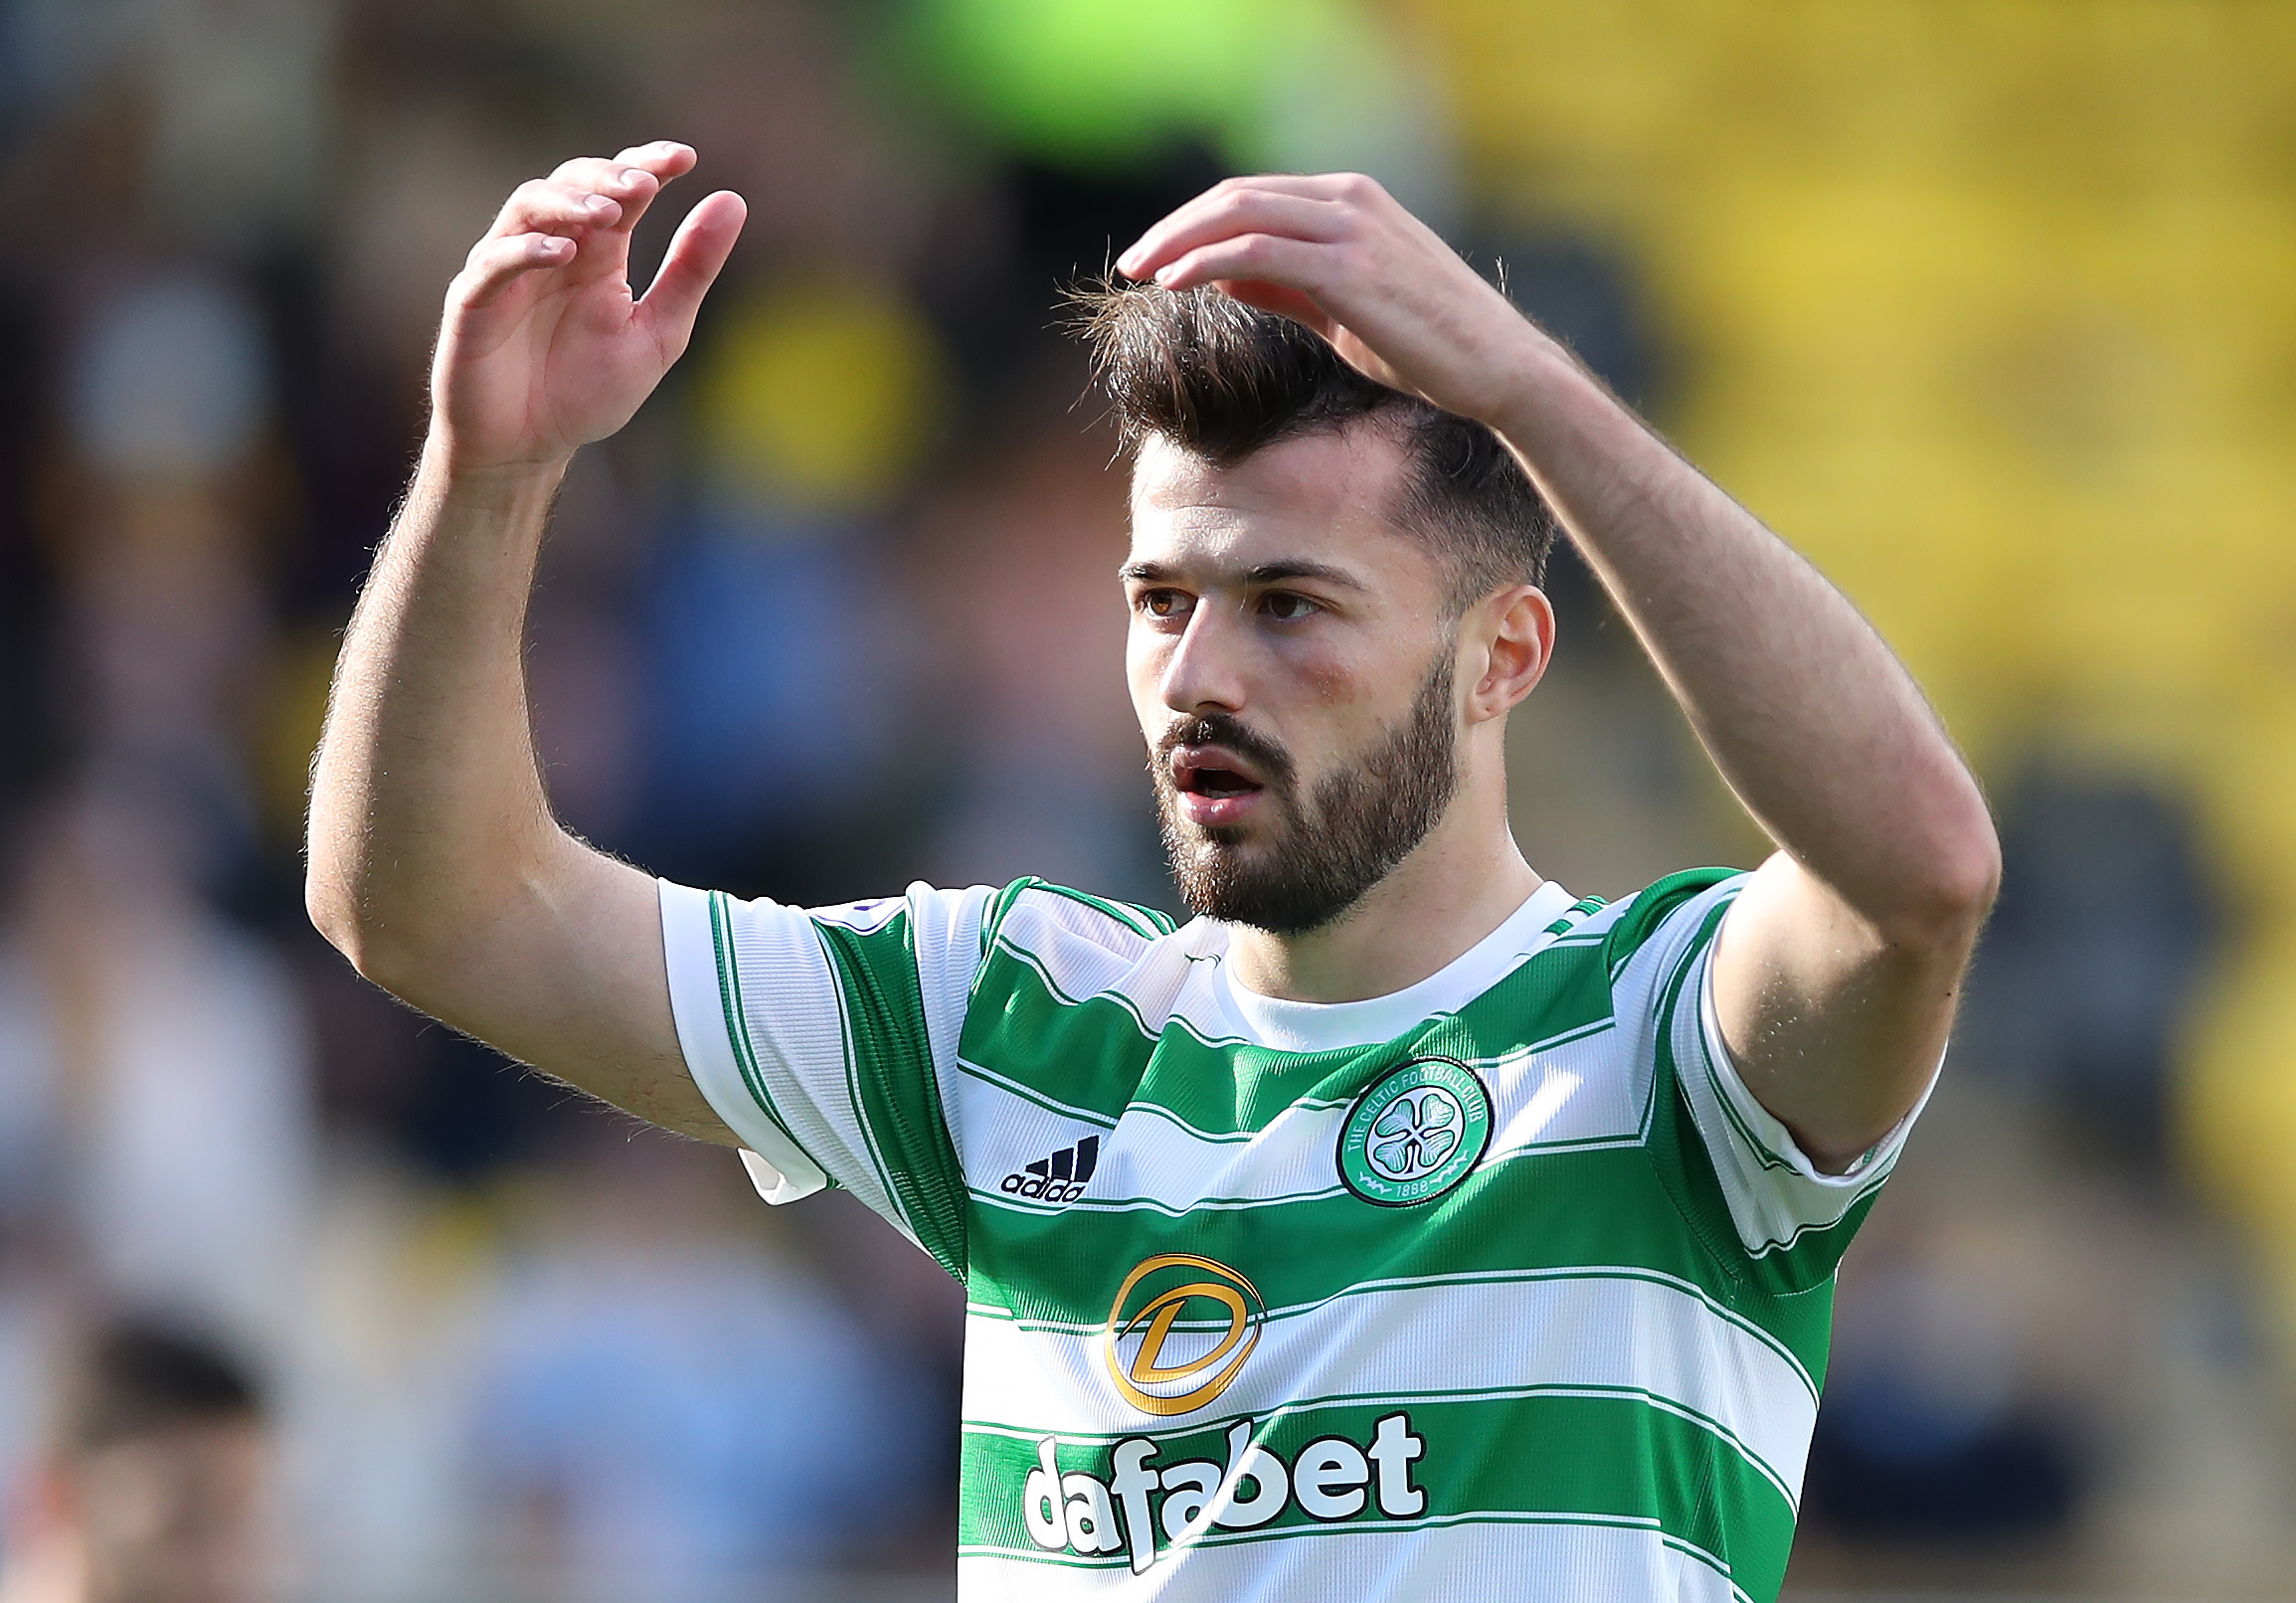 Celtic FC Remains on Top in Scotland, But Success Attracts